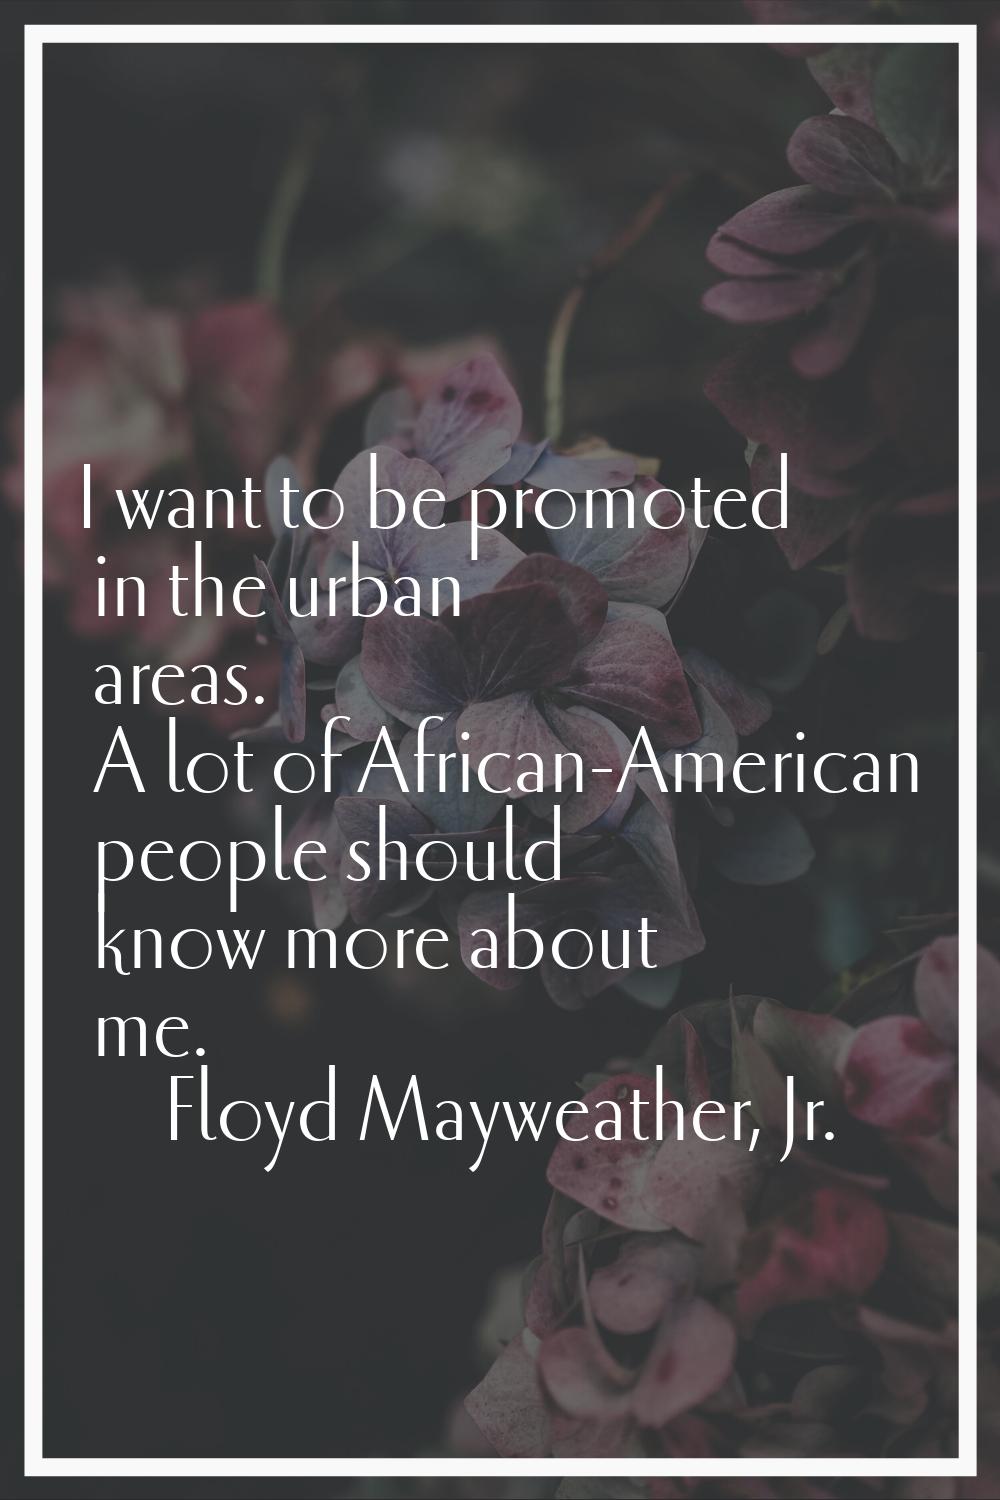 I want to be promoted in the urban areas. A lot of African-American people should know more about m